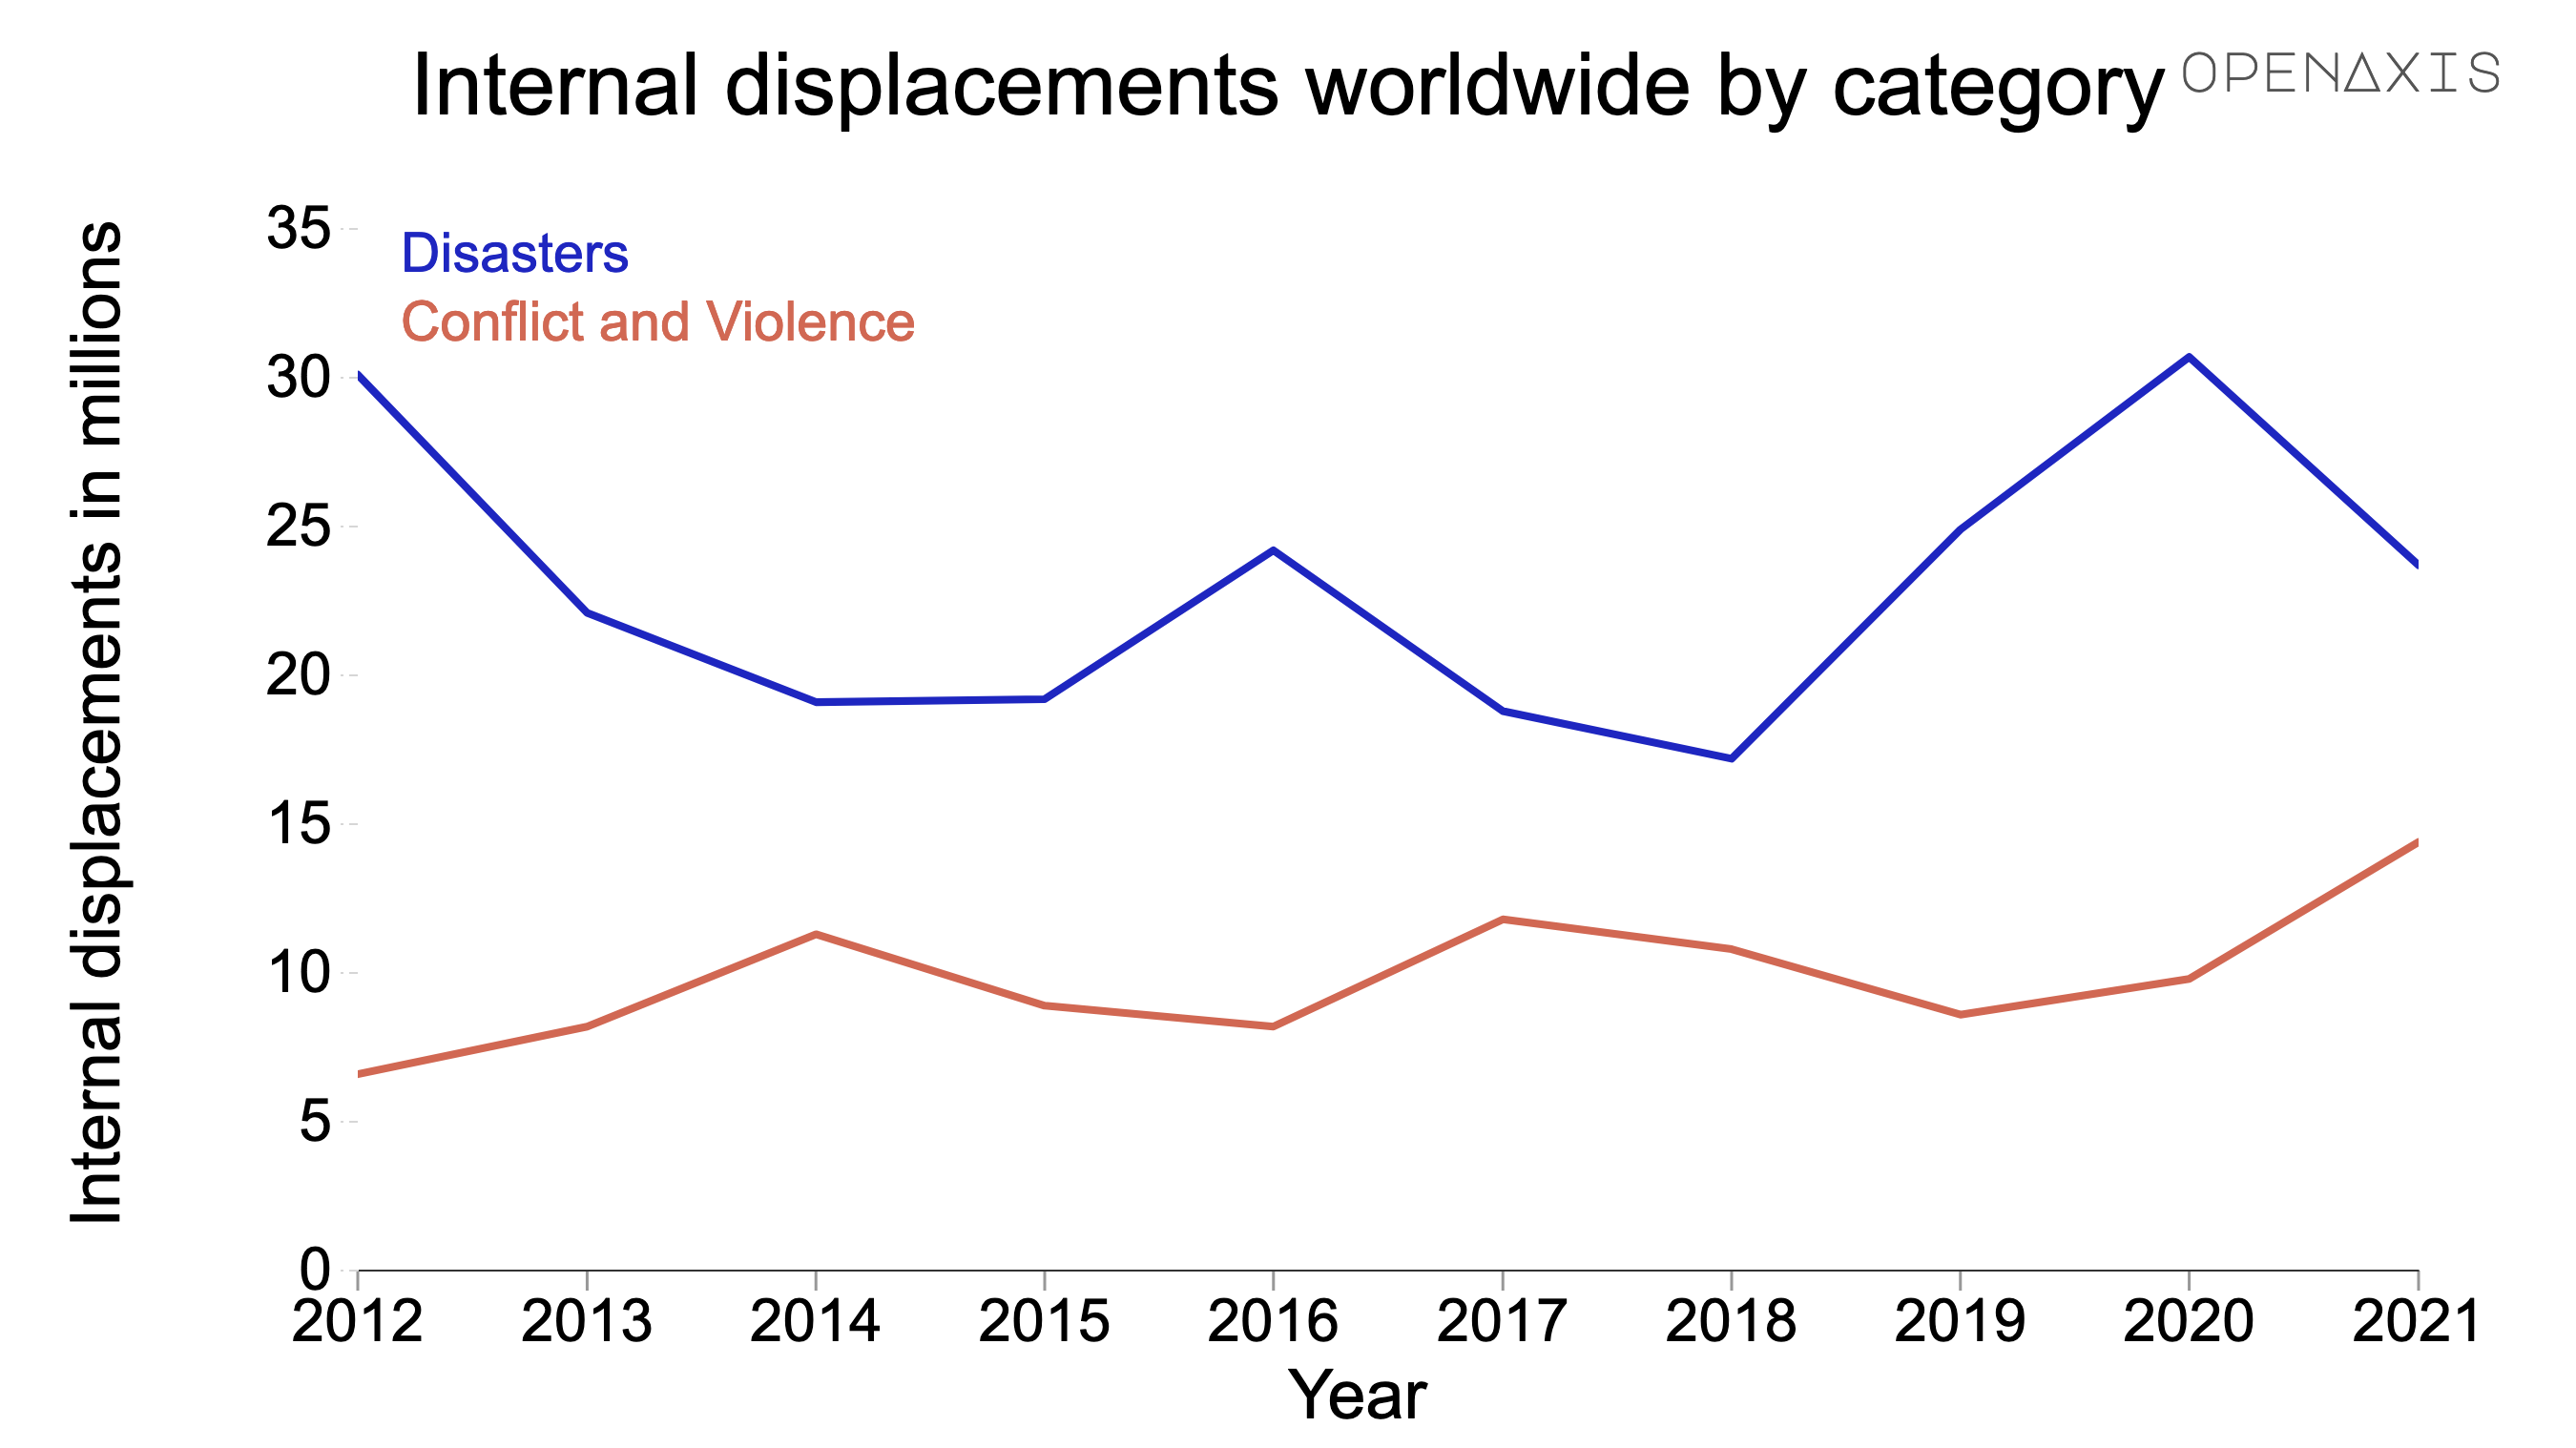 "Internal displacements worldwide by category"